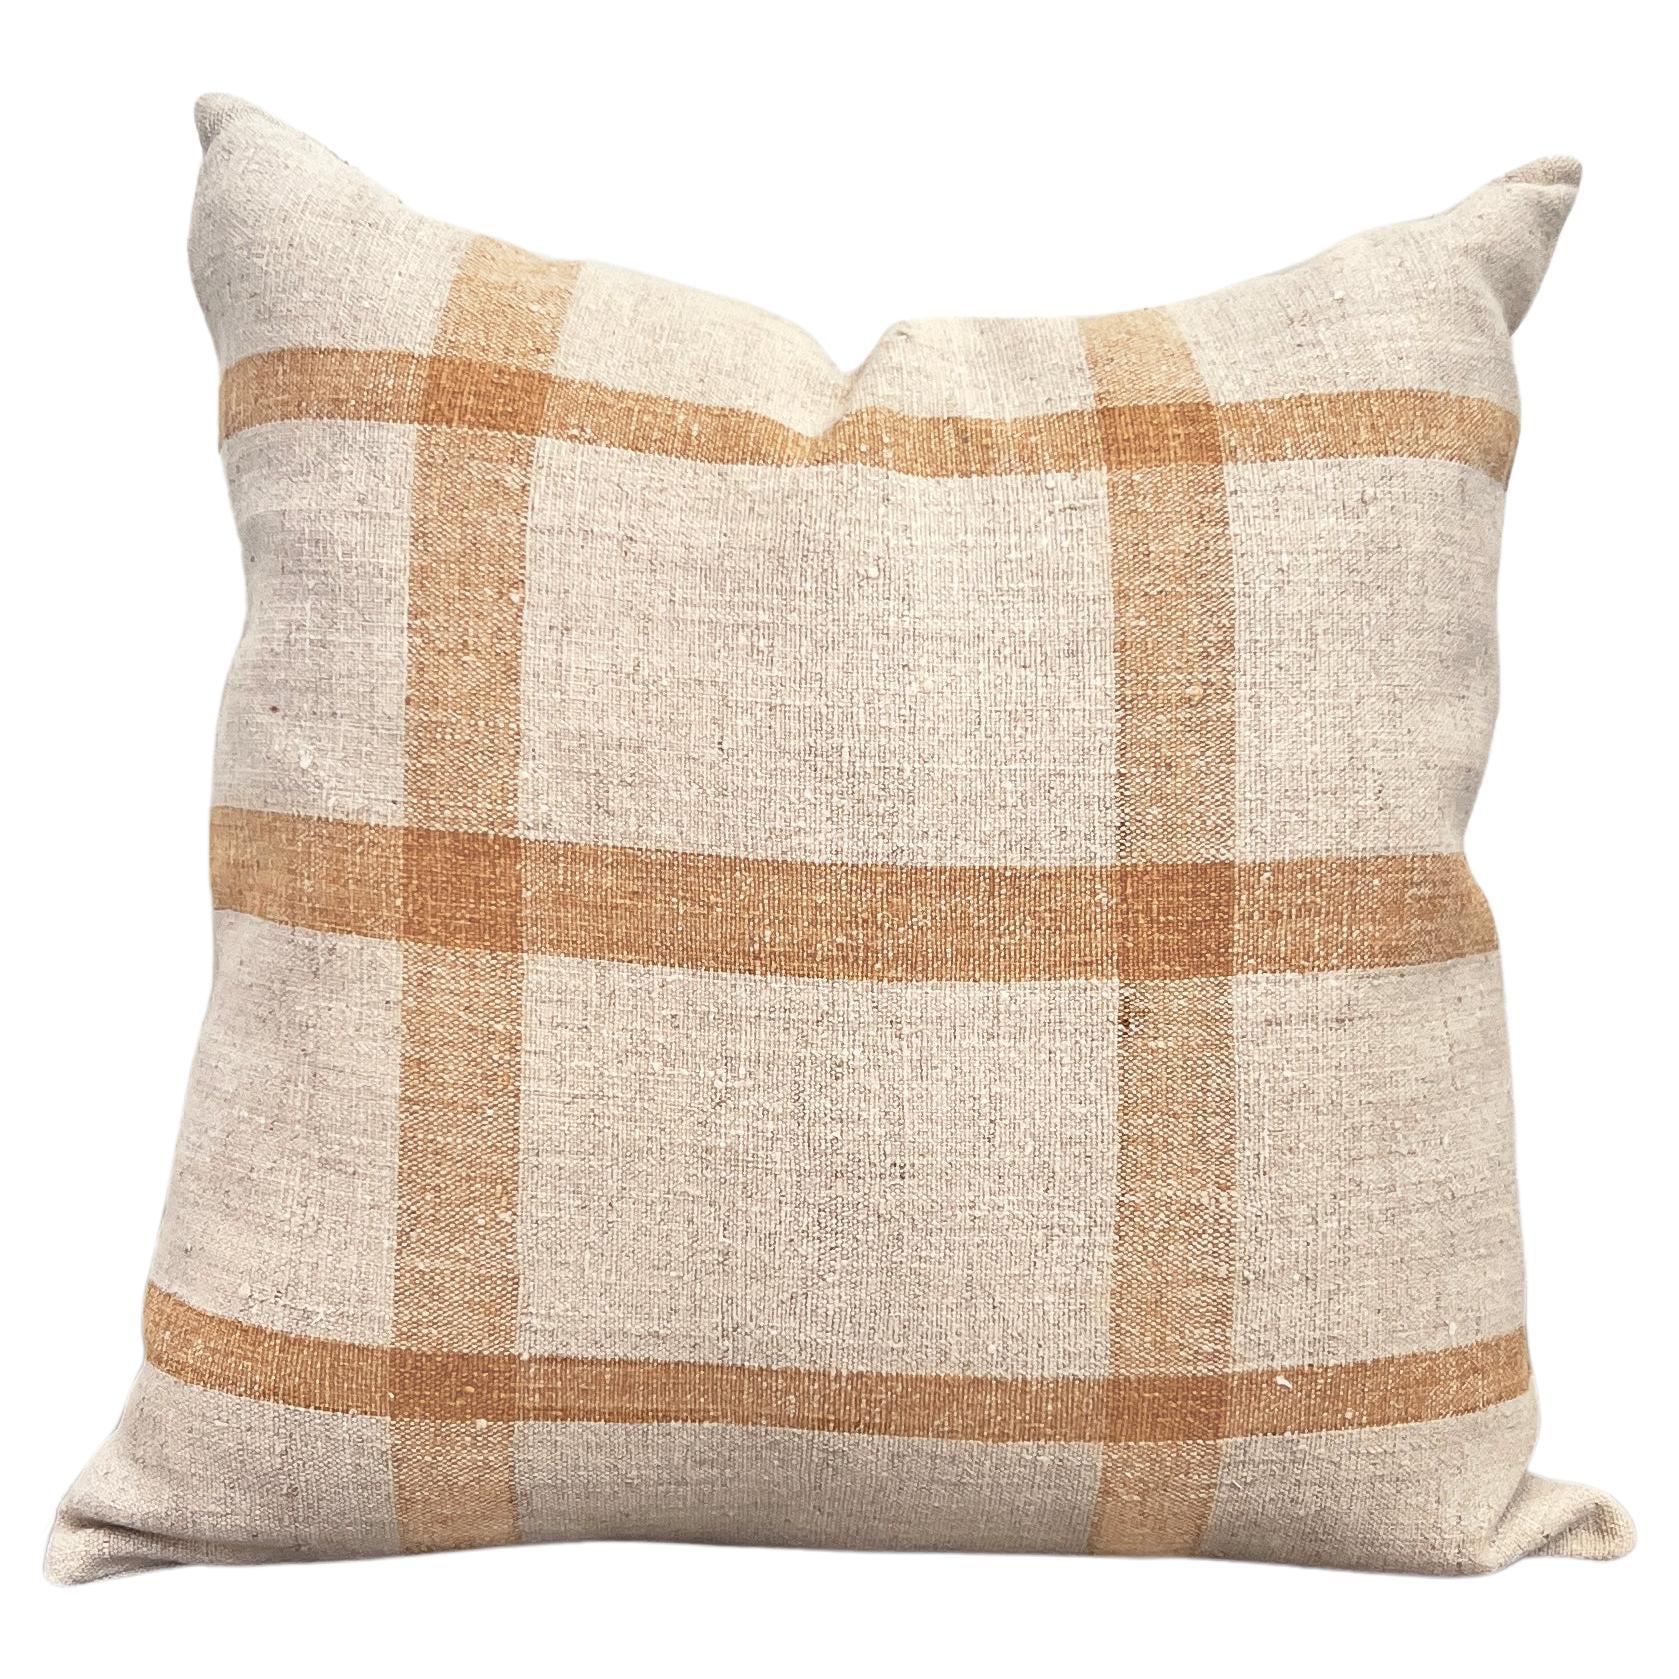 Matilde Mustard Checkered Square Throw Pillow made from Vintage Linen